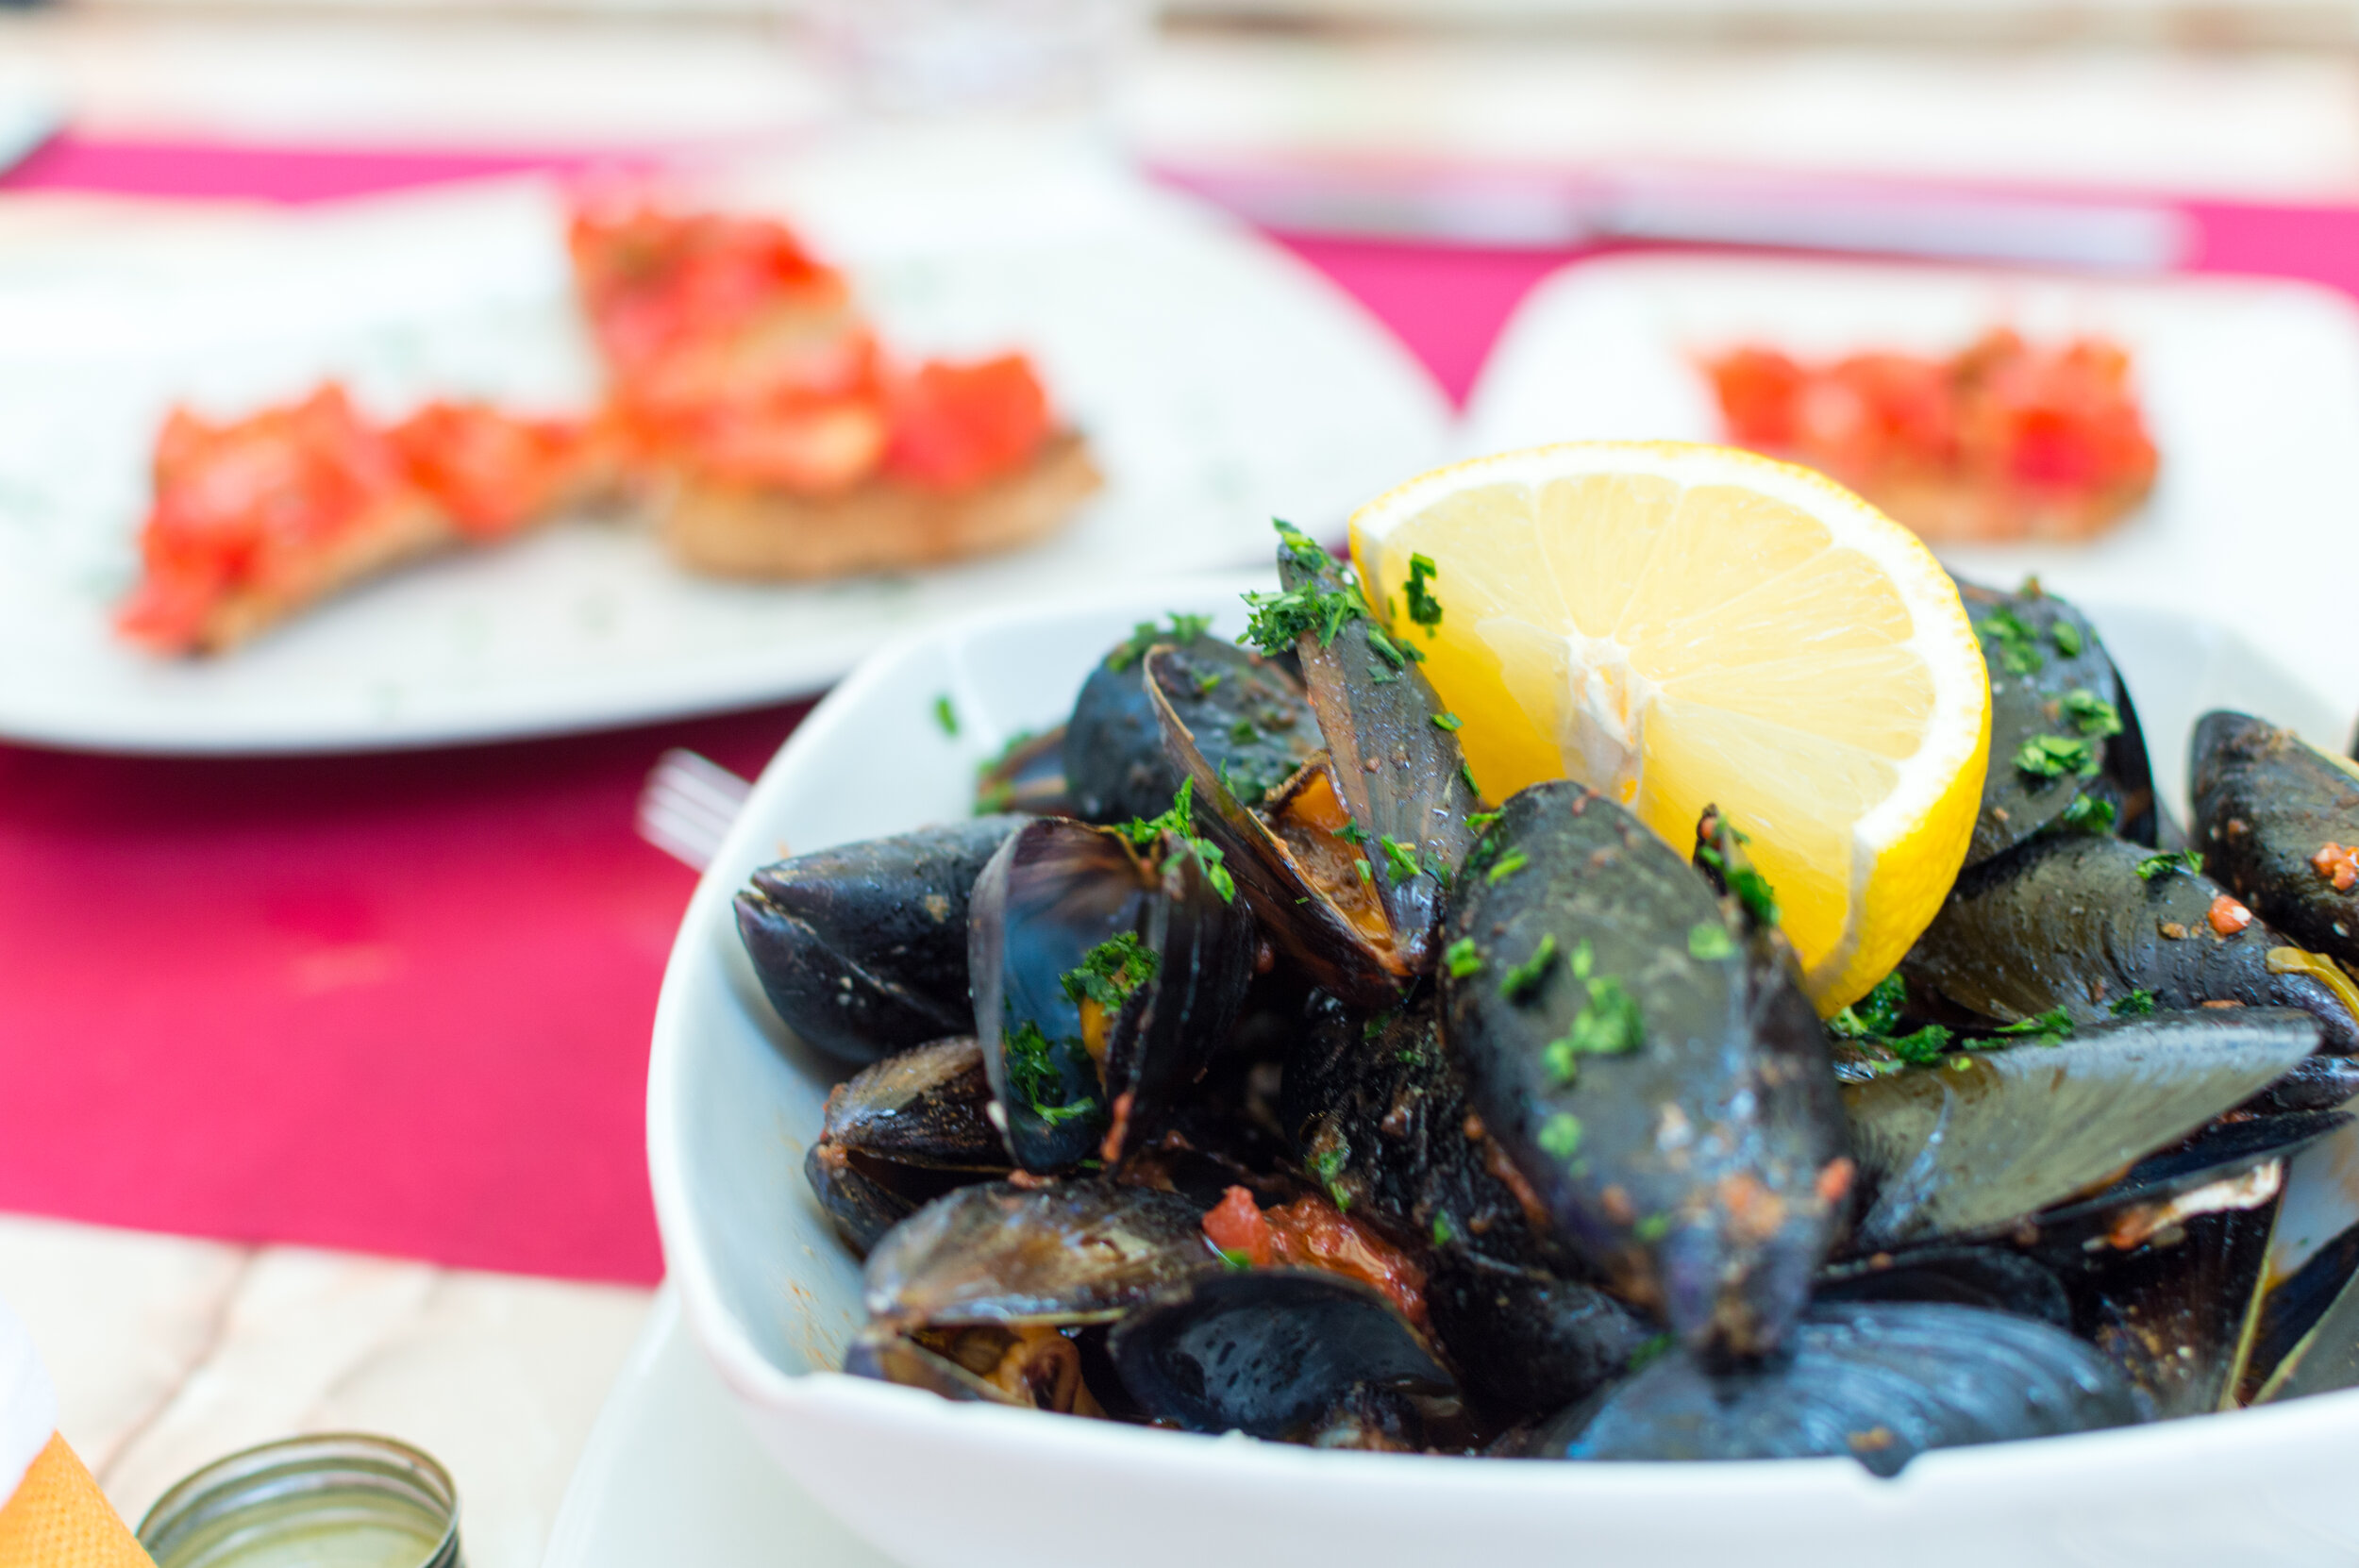 Fore Street Mussels by Sam Hayward